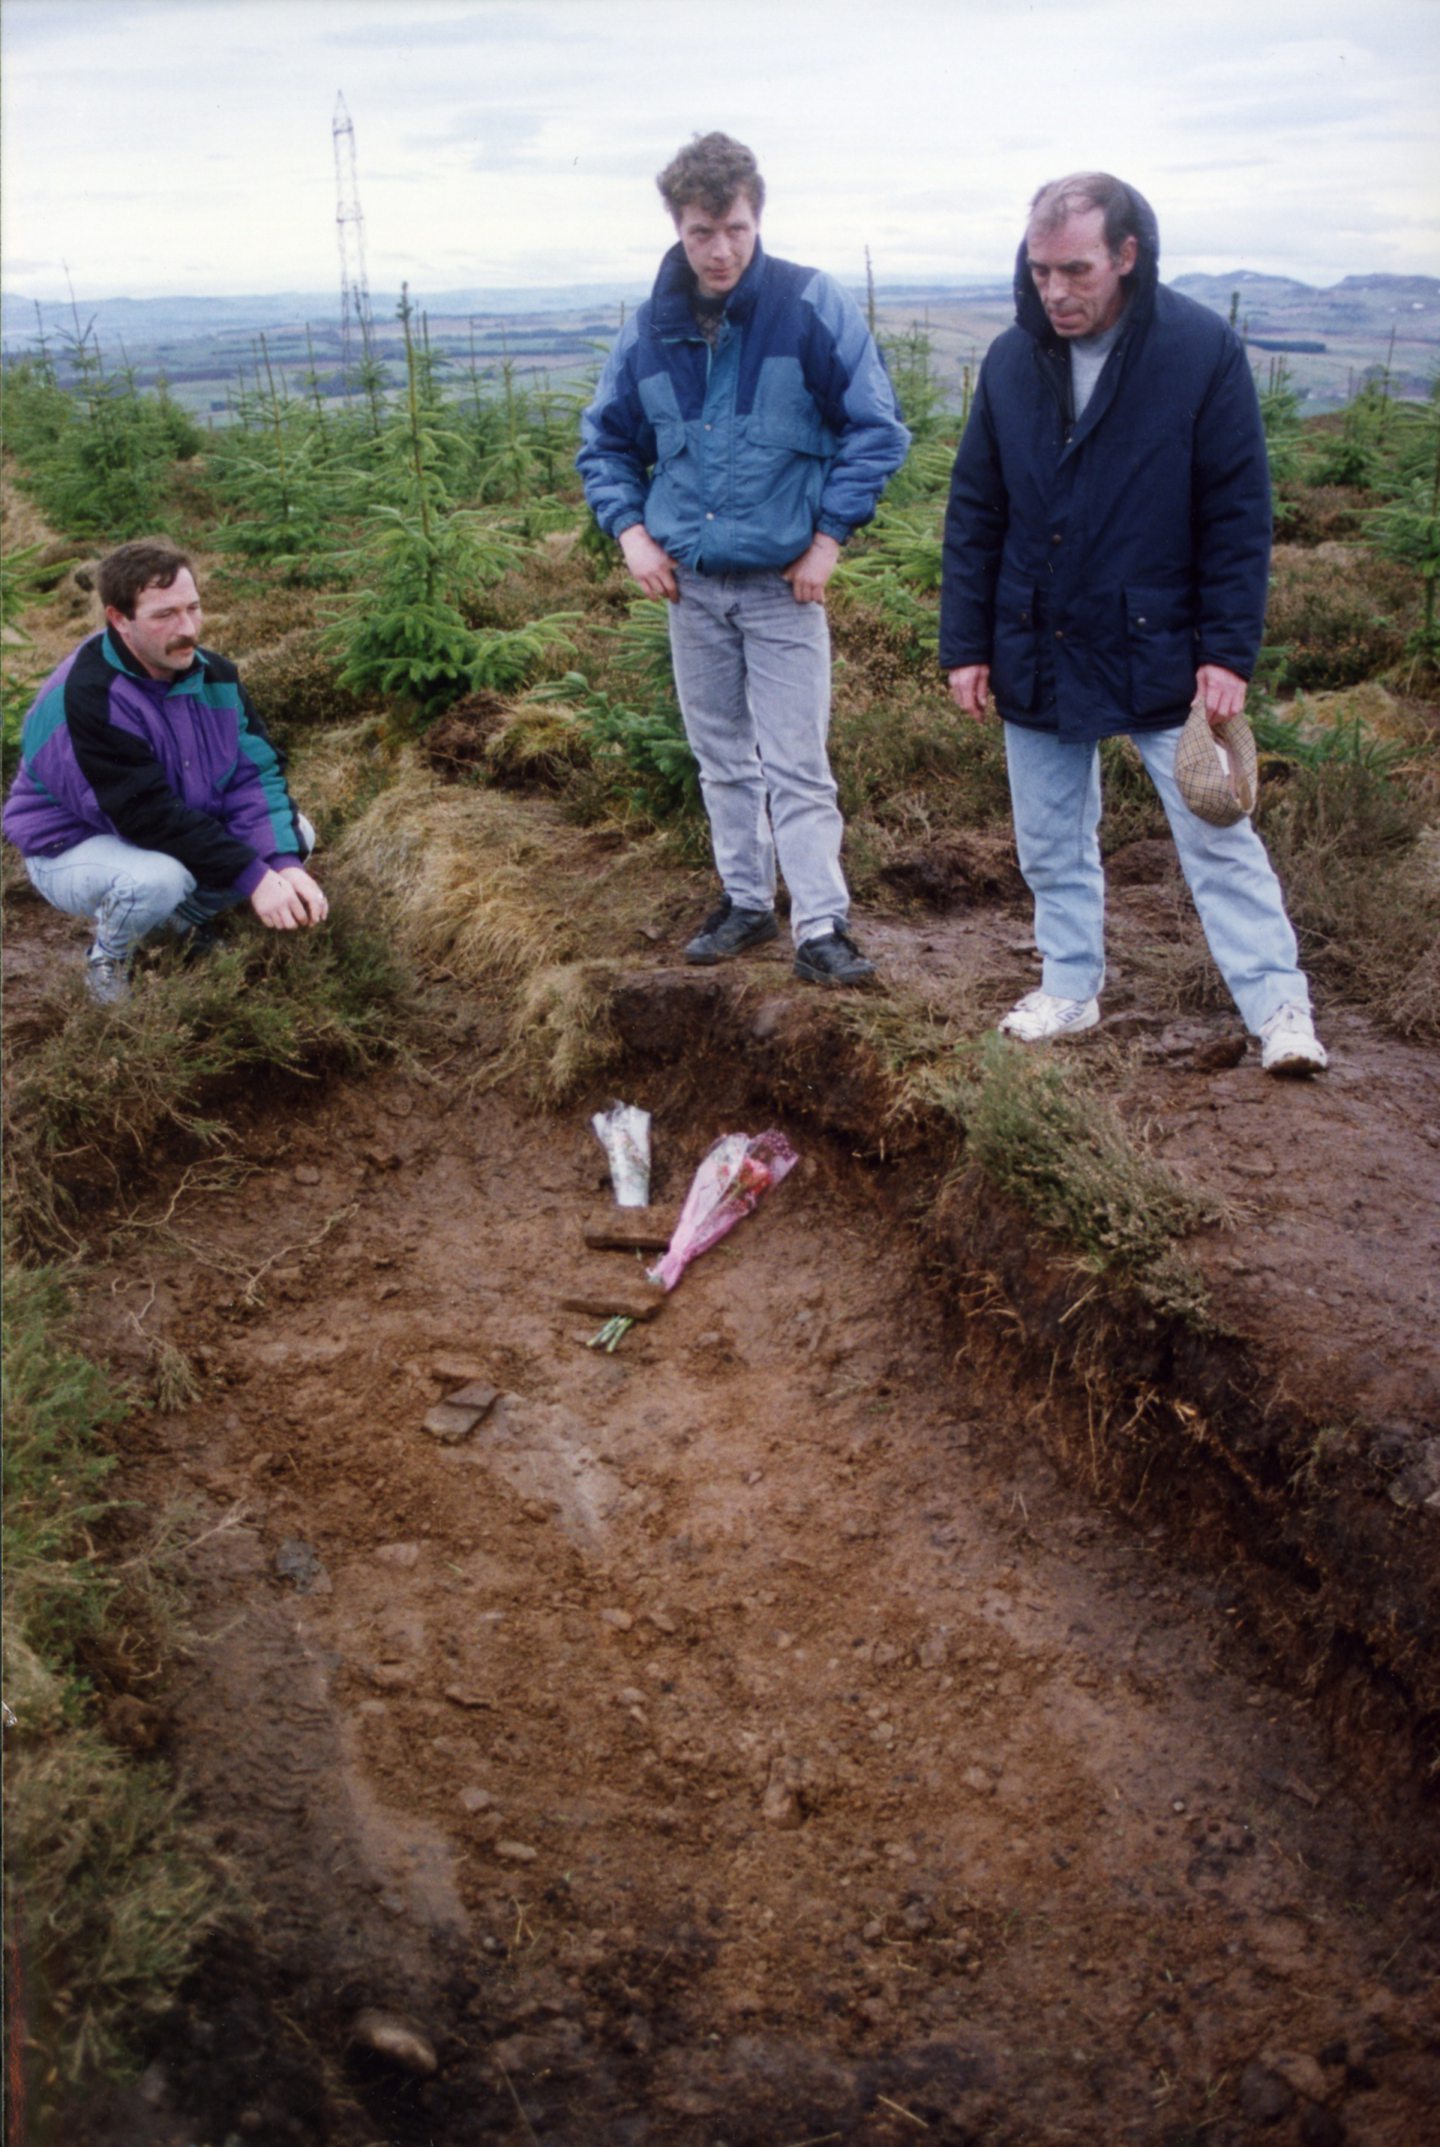 George Thomson, Rab Wilson and David Wilson visit the spot where Nealle was found. Image: DC Thomson.